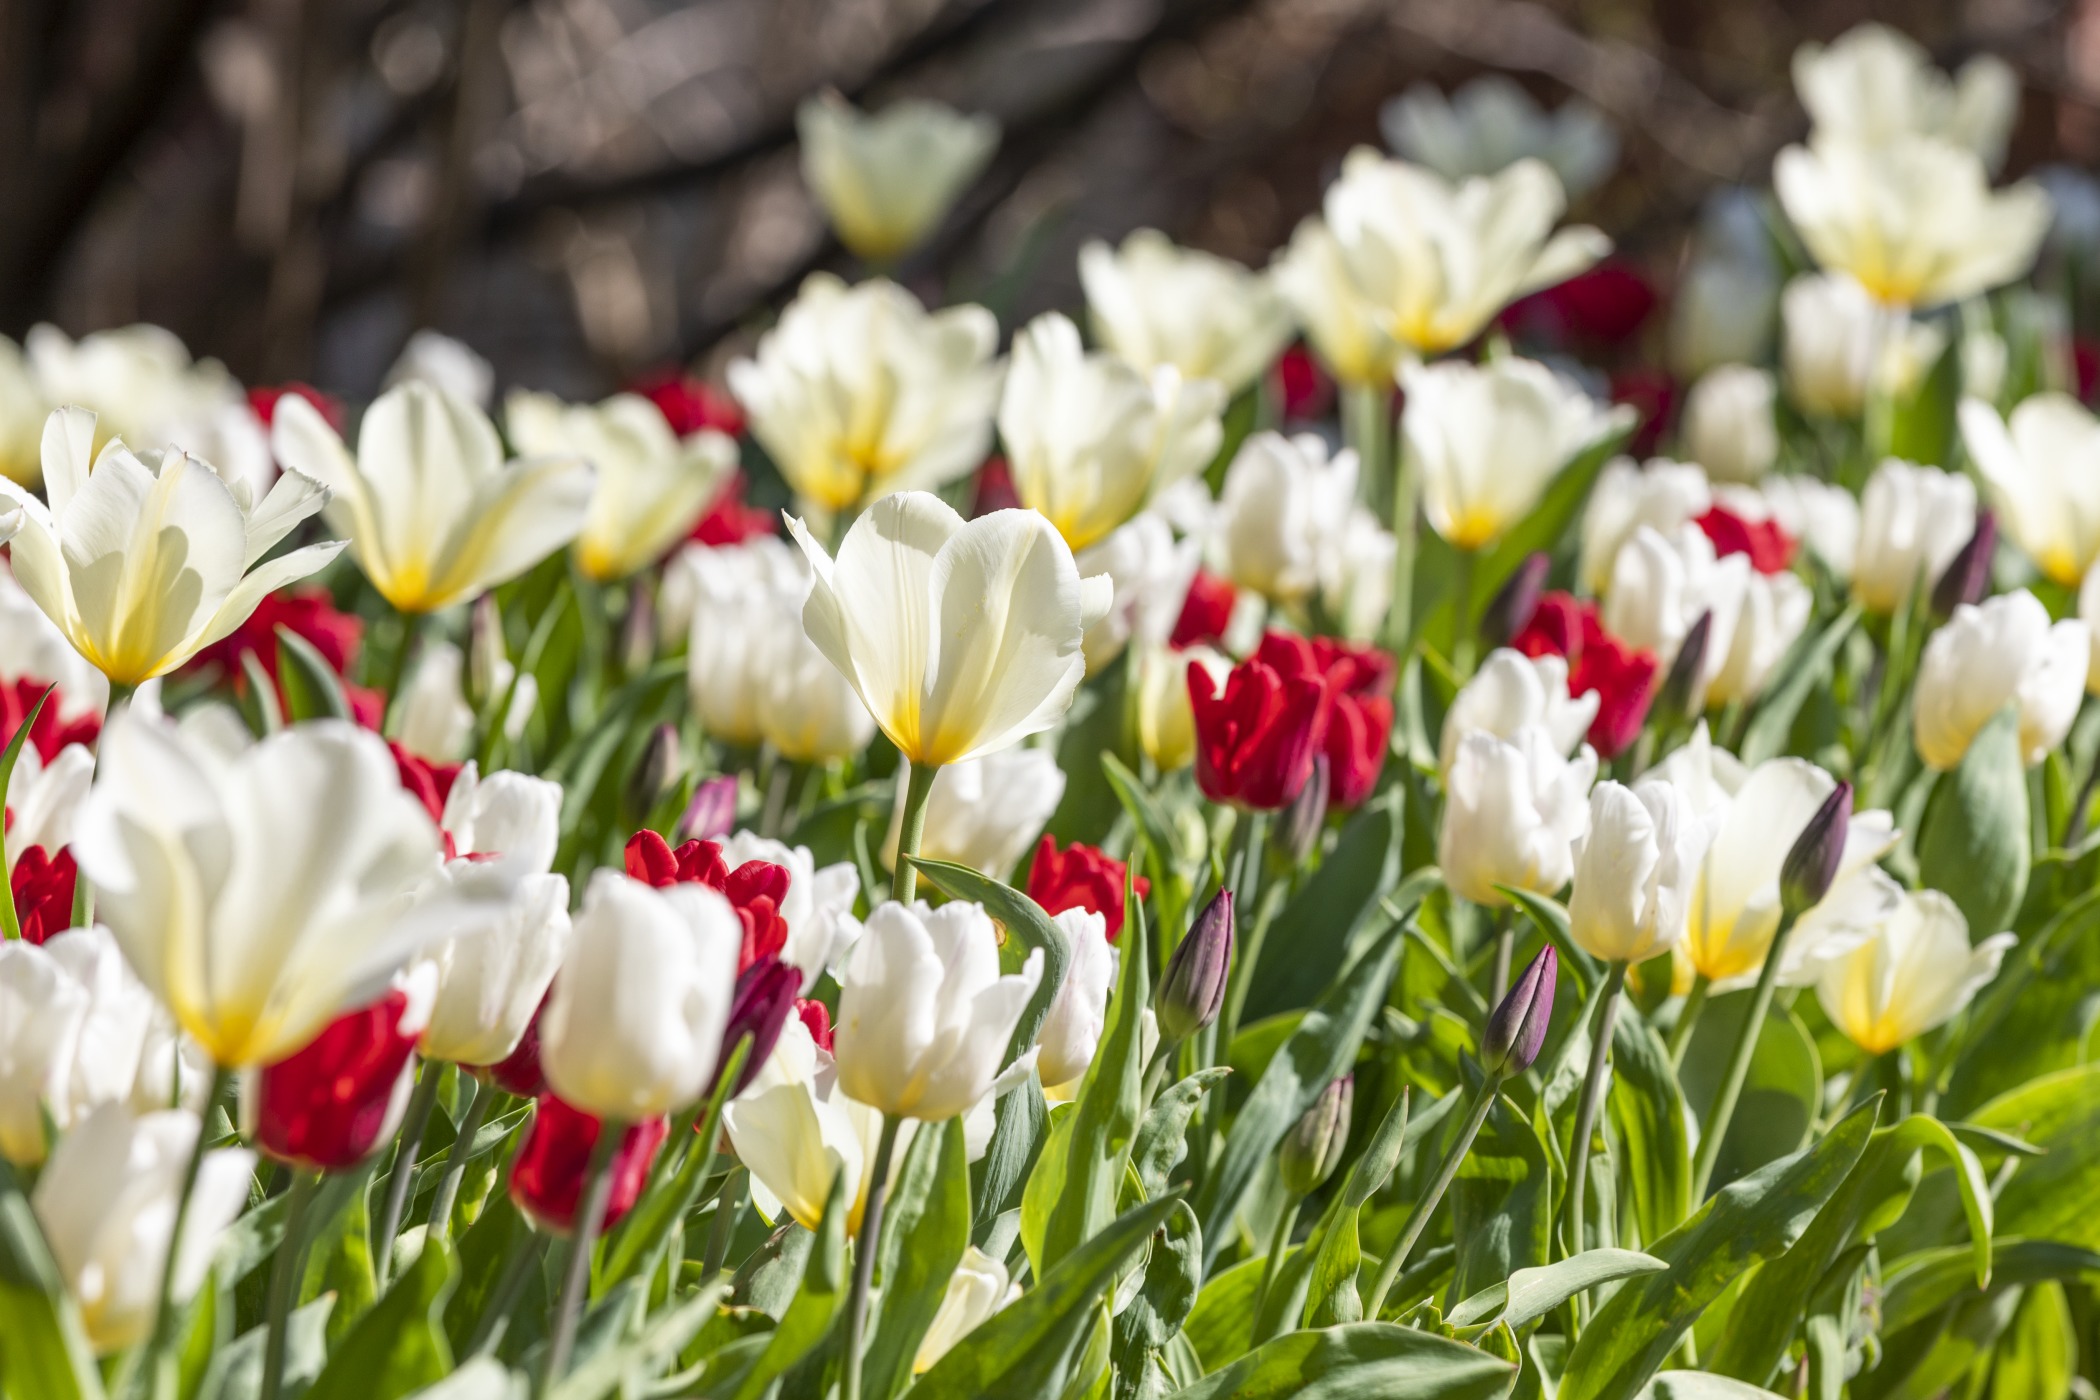 Tulips at Newfields. Image courtesy of Newfields.